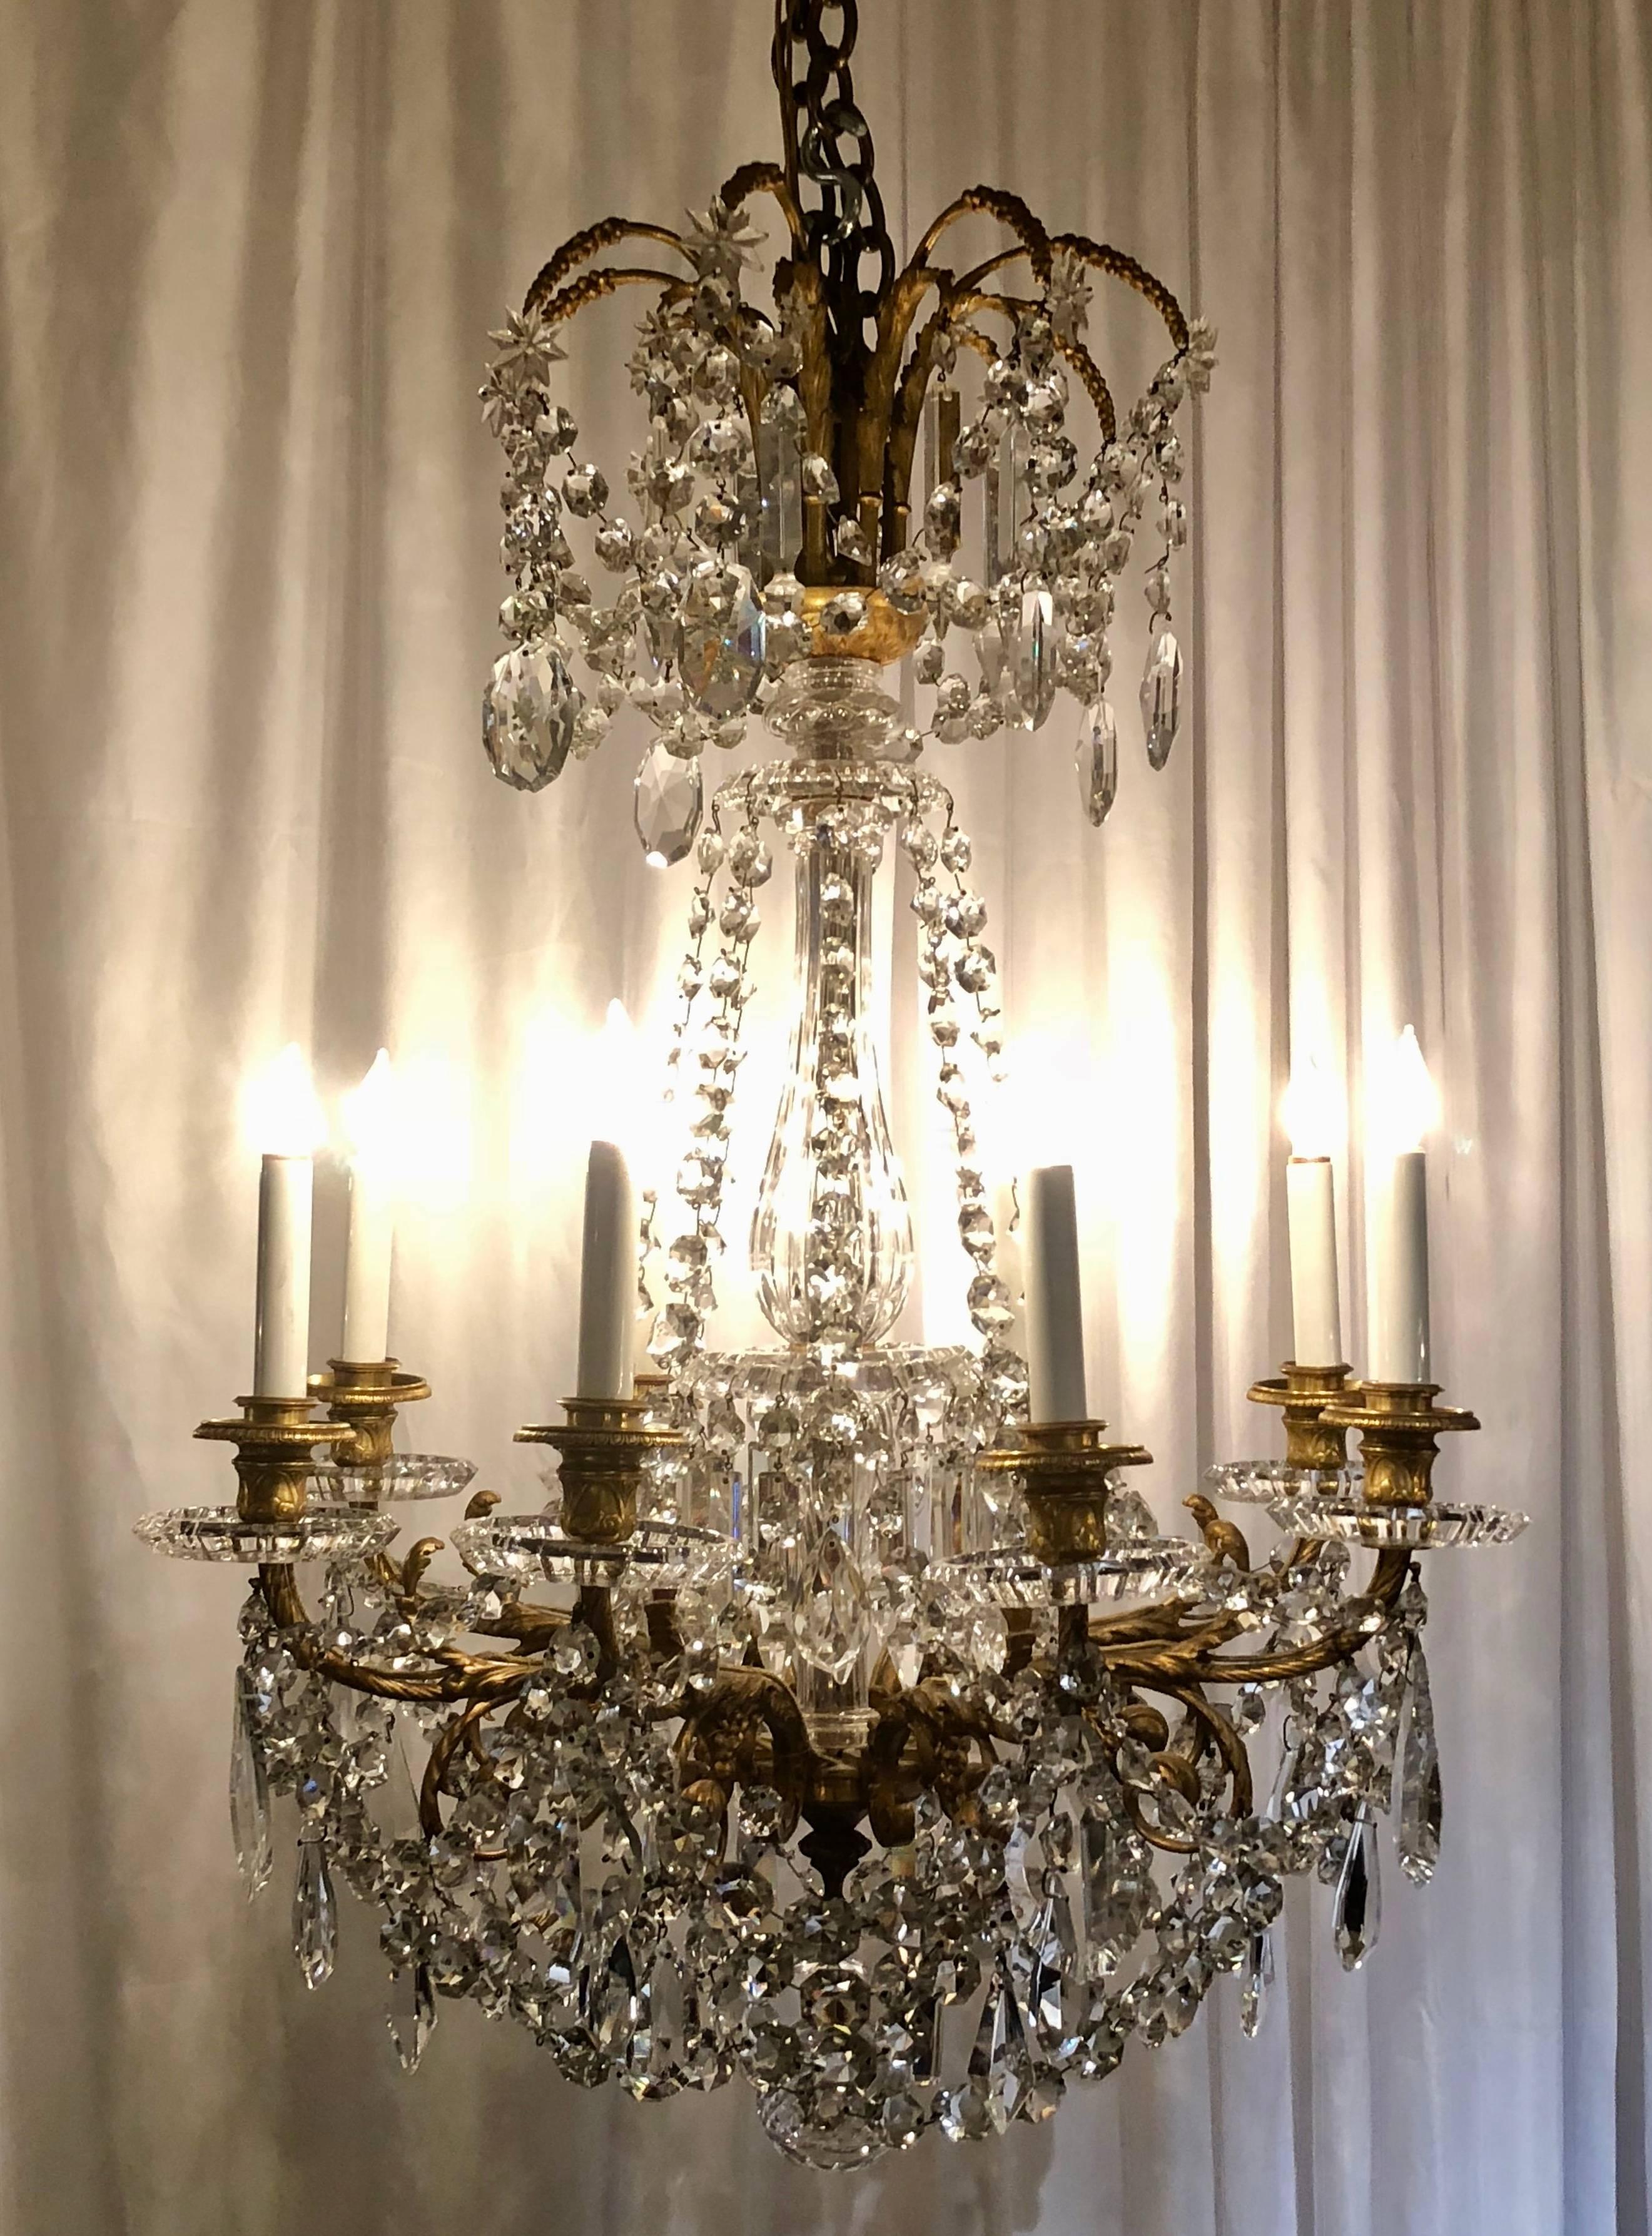 Antique French crystal and bronze doré chandelier, circa 1880.